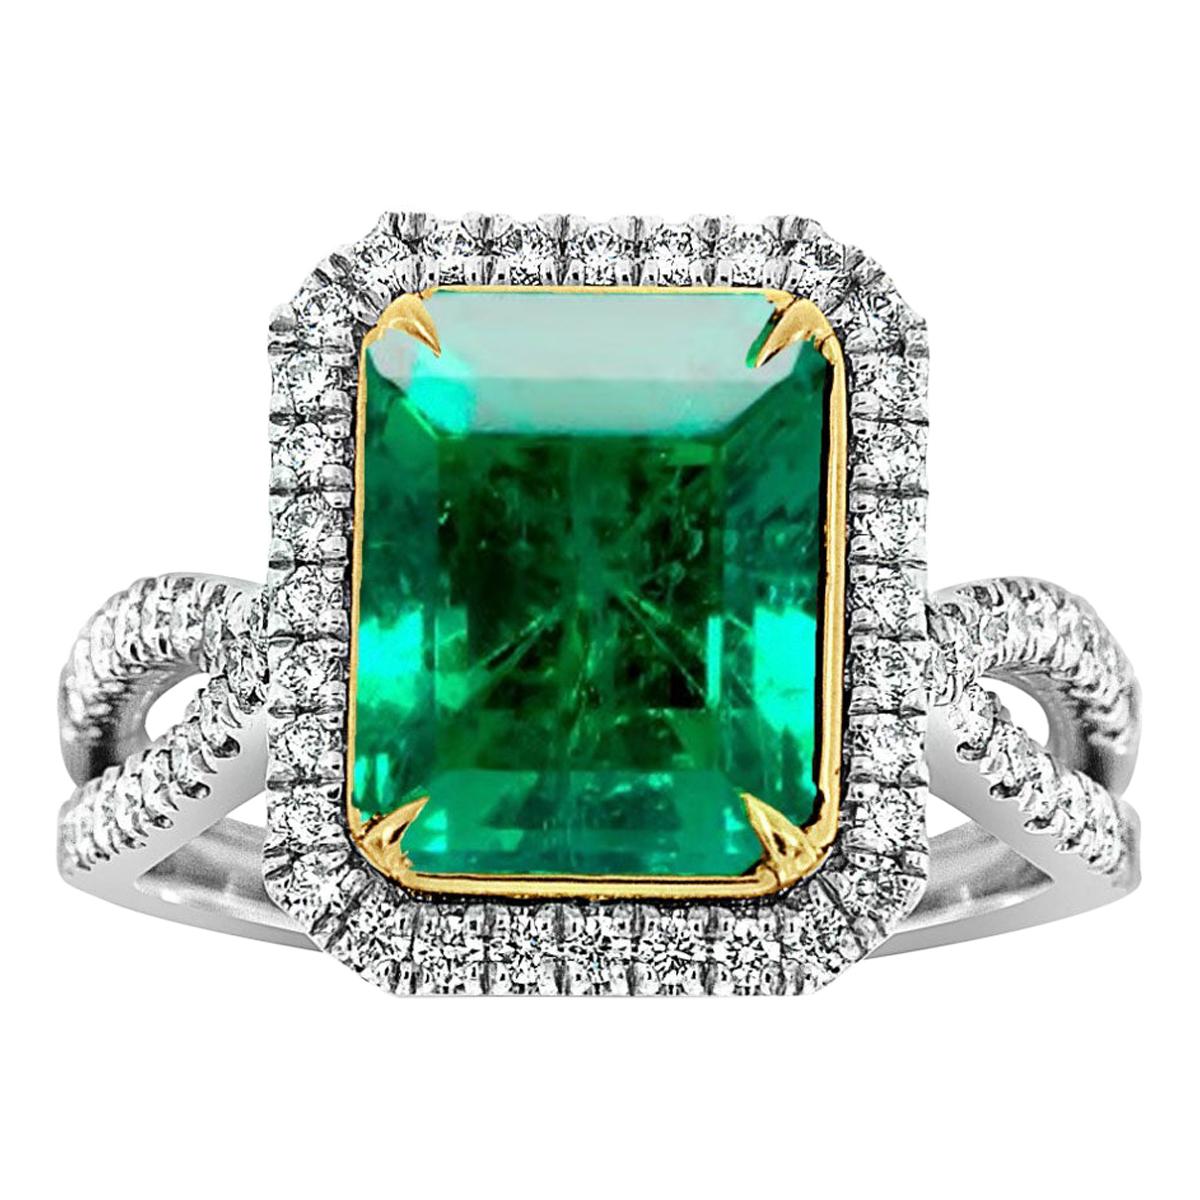 GIA Certified 3.90 Carat Green Emerald 18K White & Yellow Gold Diamond Ring  For Sale